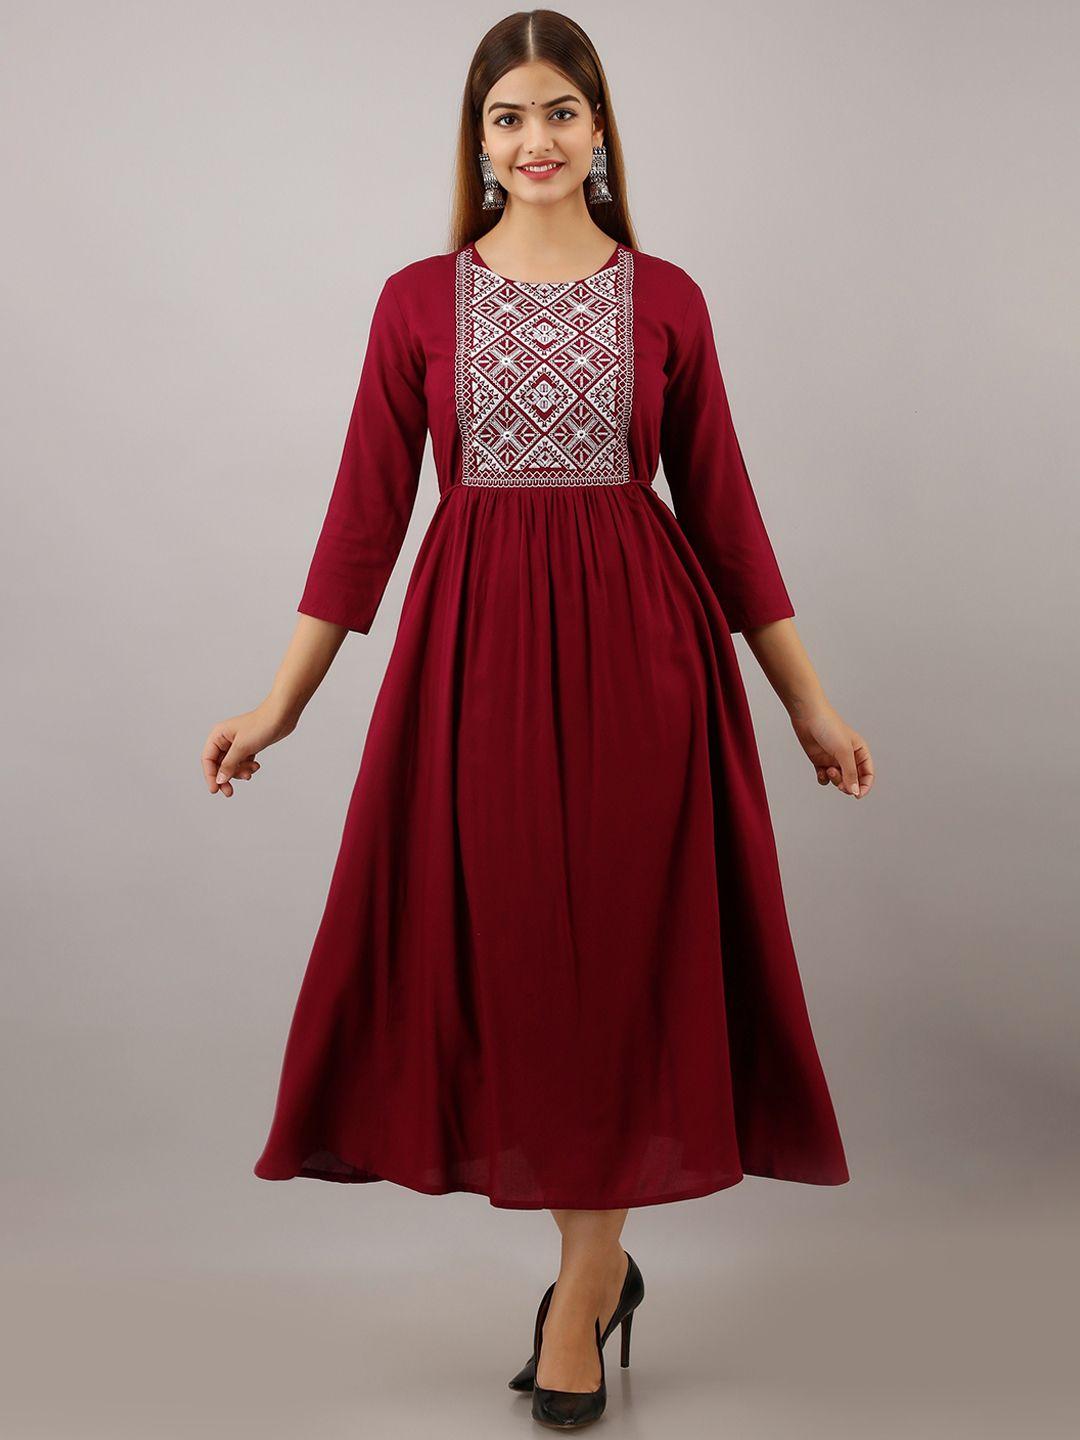 women-touch-maroon-&-white-floral-embroidered-ethnic-midi-fit-&-flared-dress